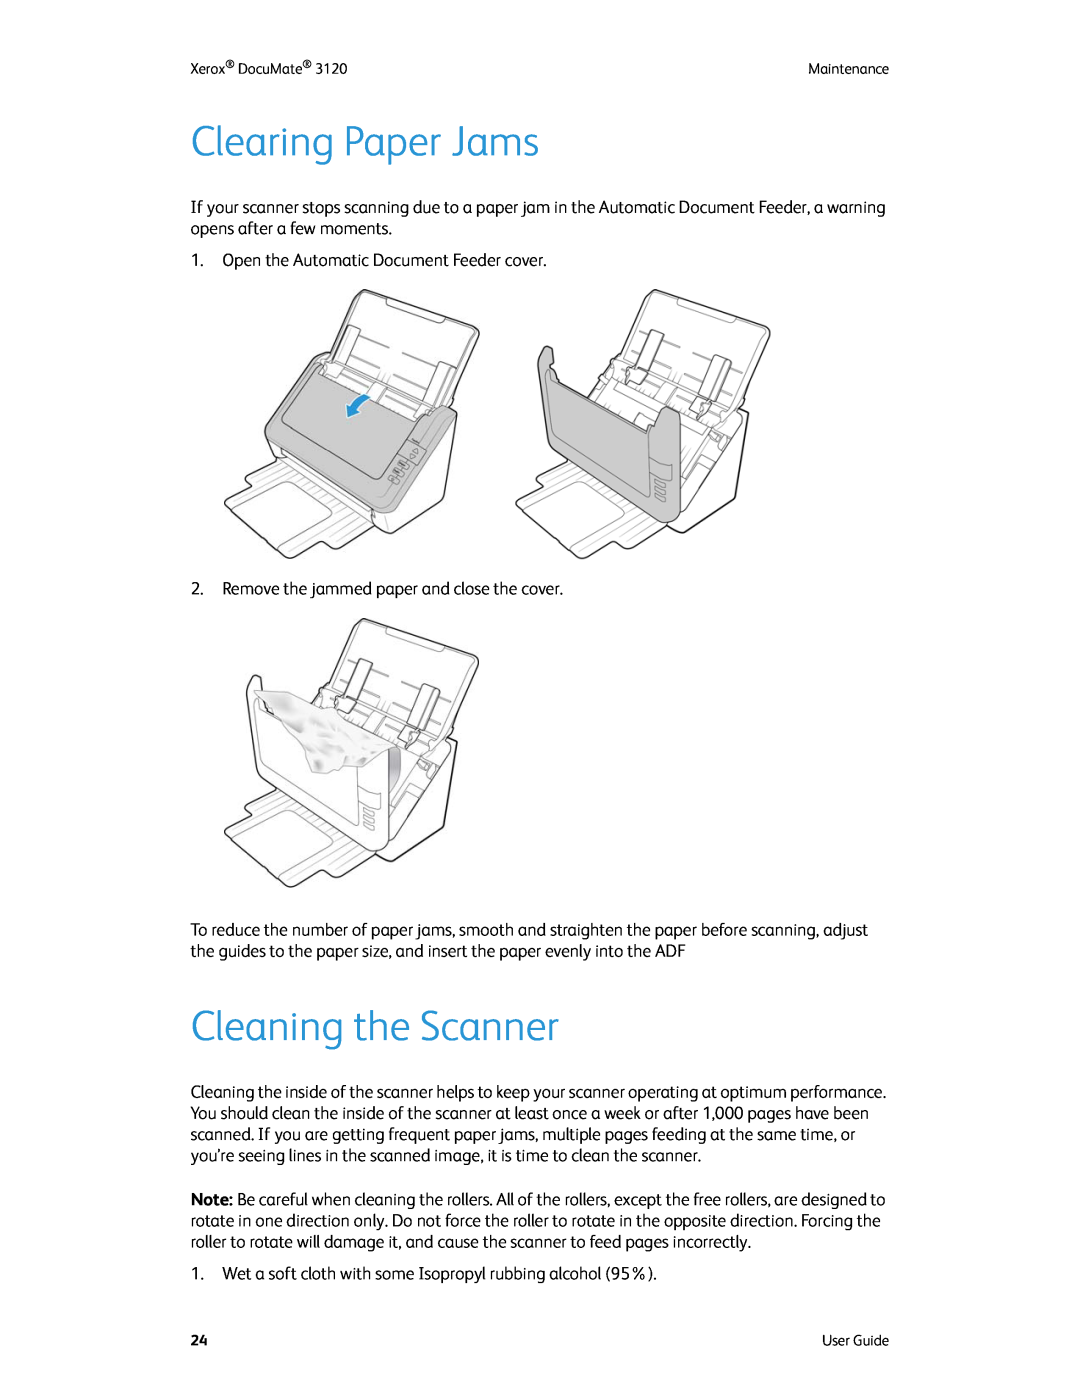 Xerox xerox manual Clearing Paper Jams, Cleaning the Scanner 